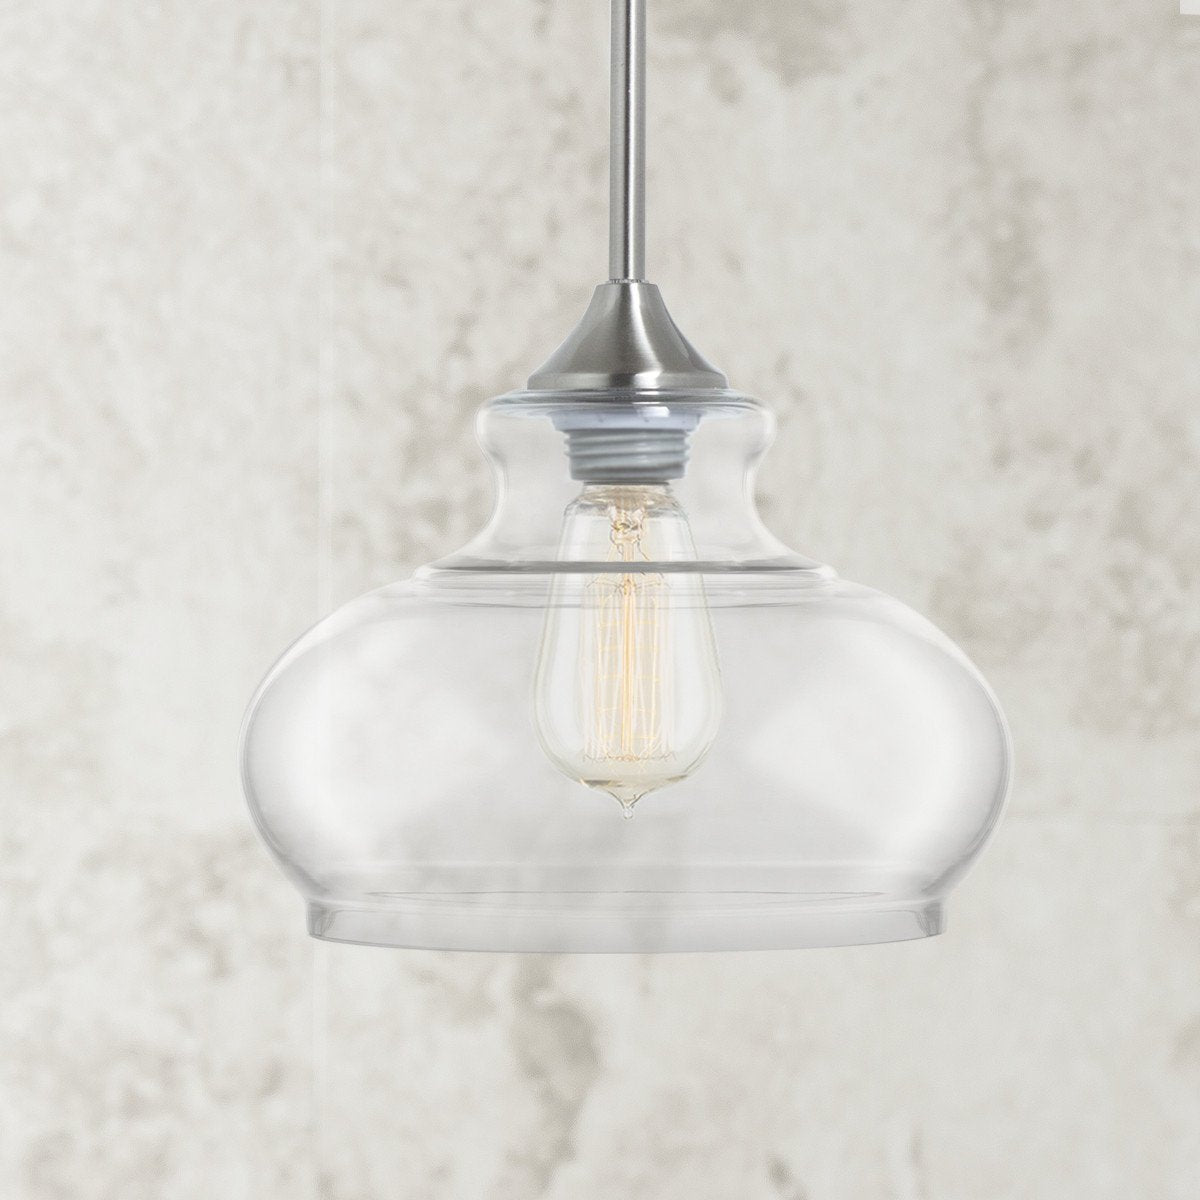 Ariella Ovale Pendant Light, Lighting Linea | Affordable Lighting and Residential included bulb Modern | LED